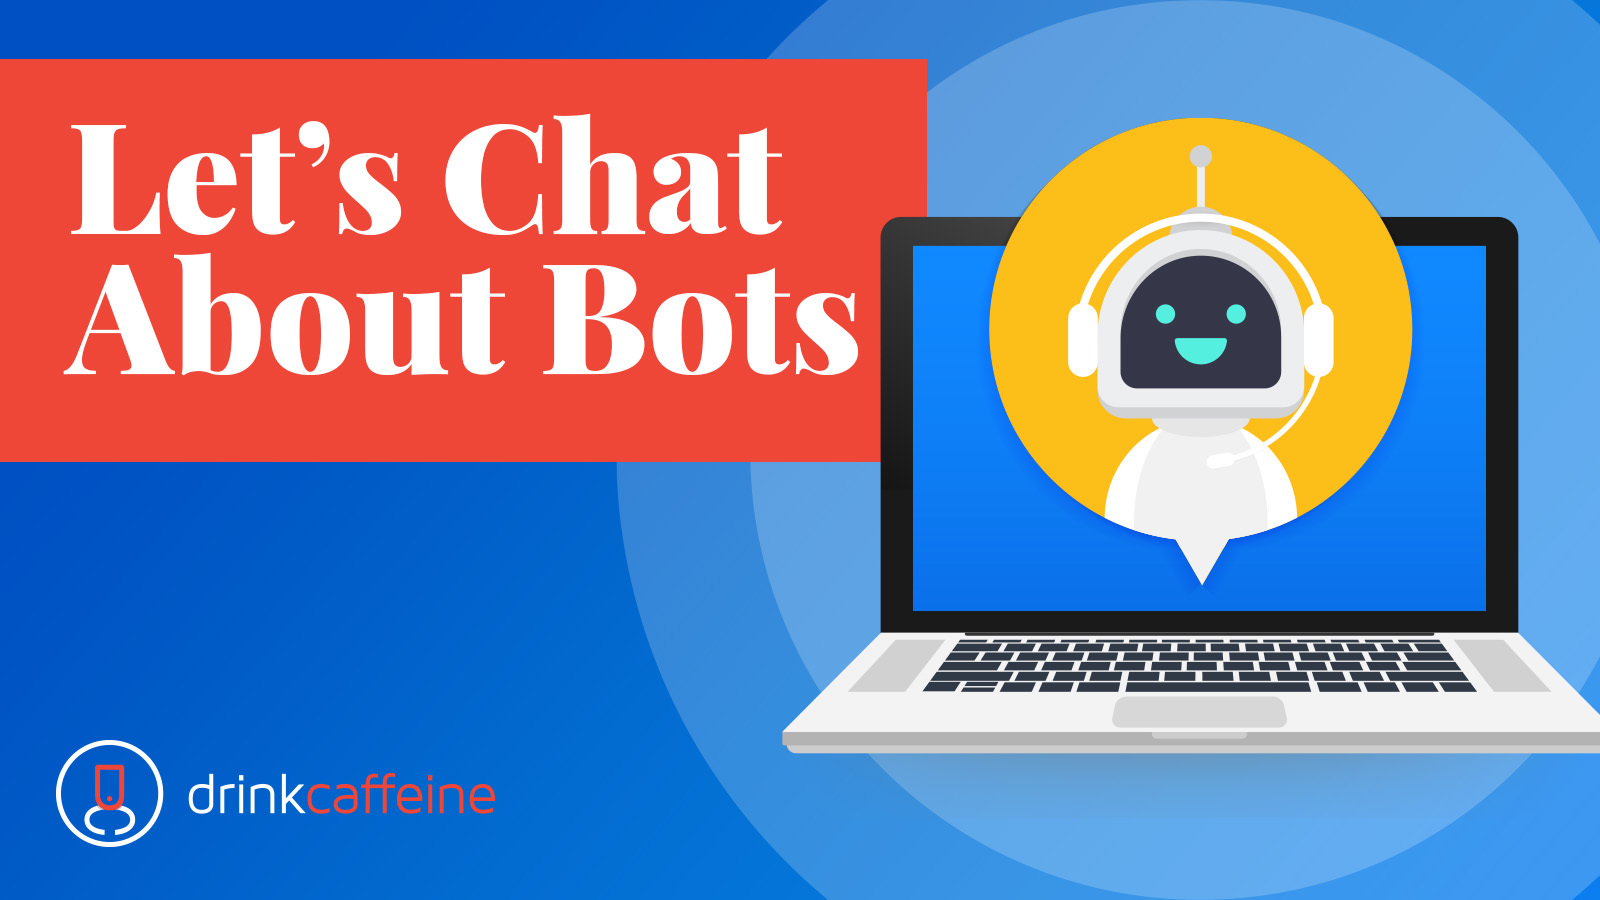 Regardless of how you feel about it, chatbots are here to stay blog image